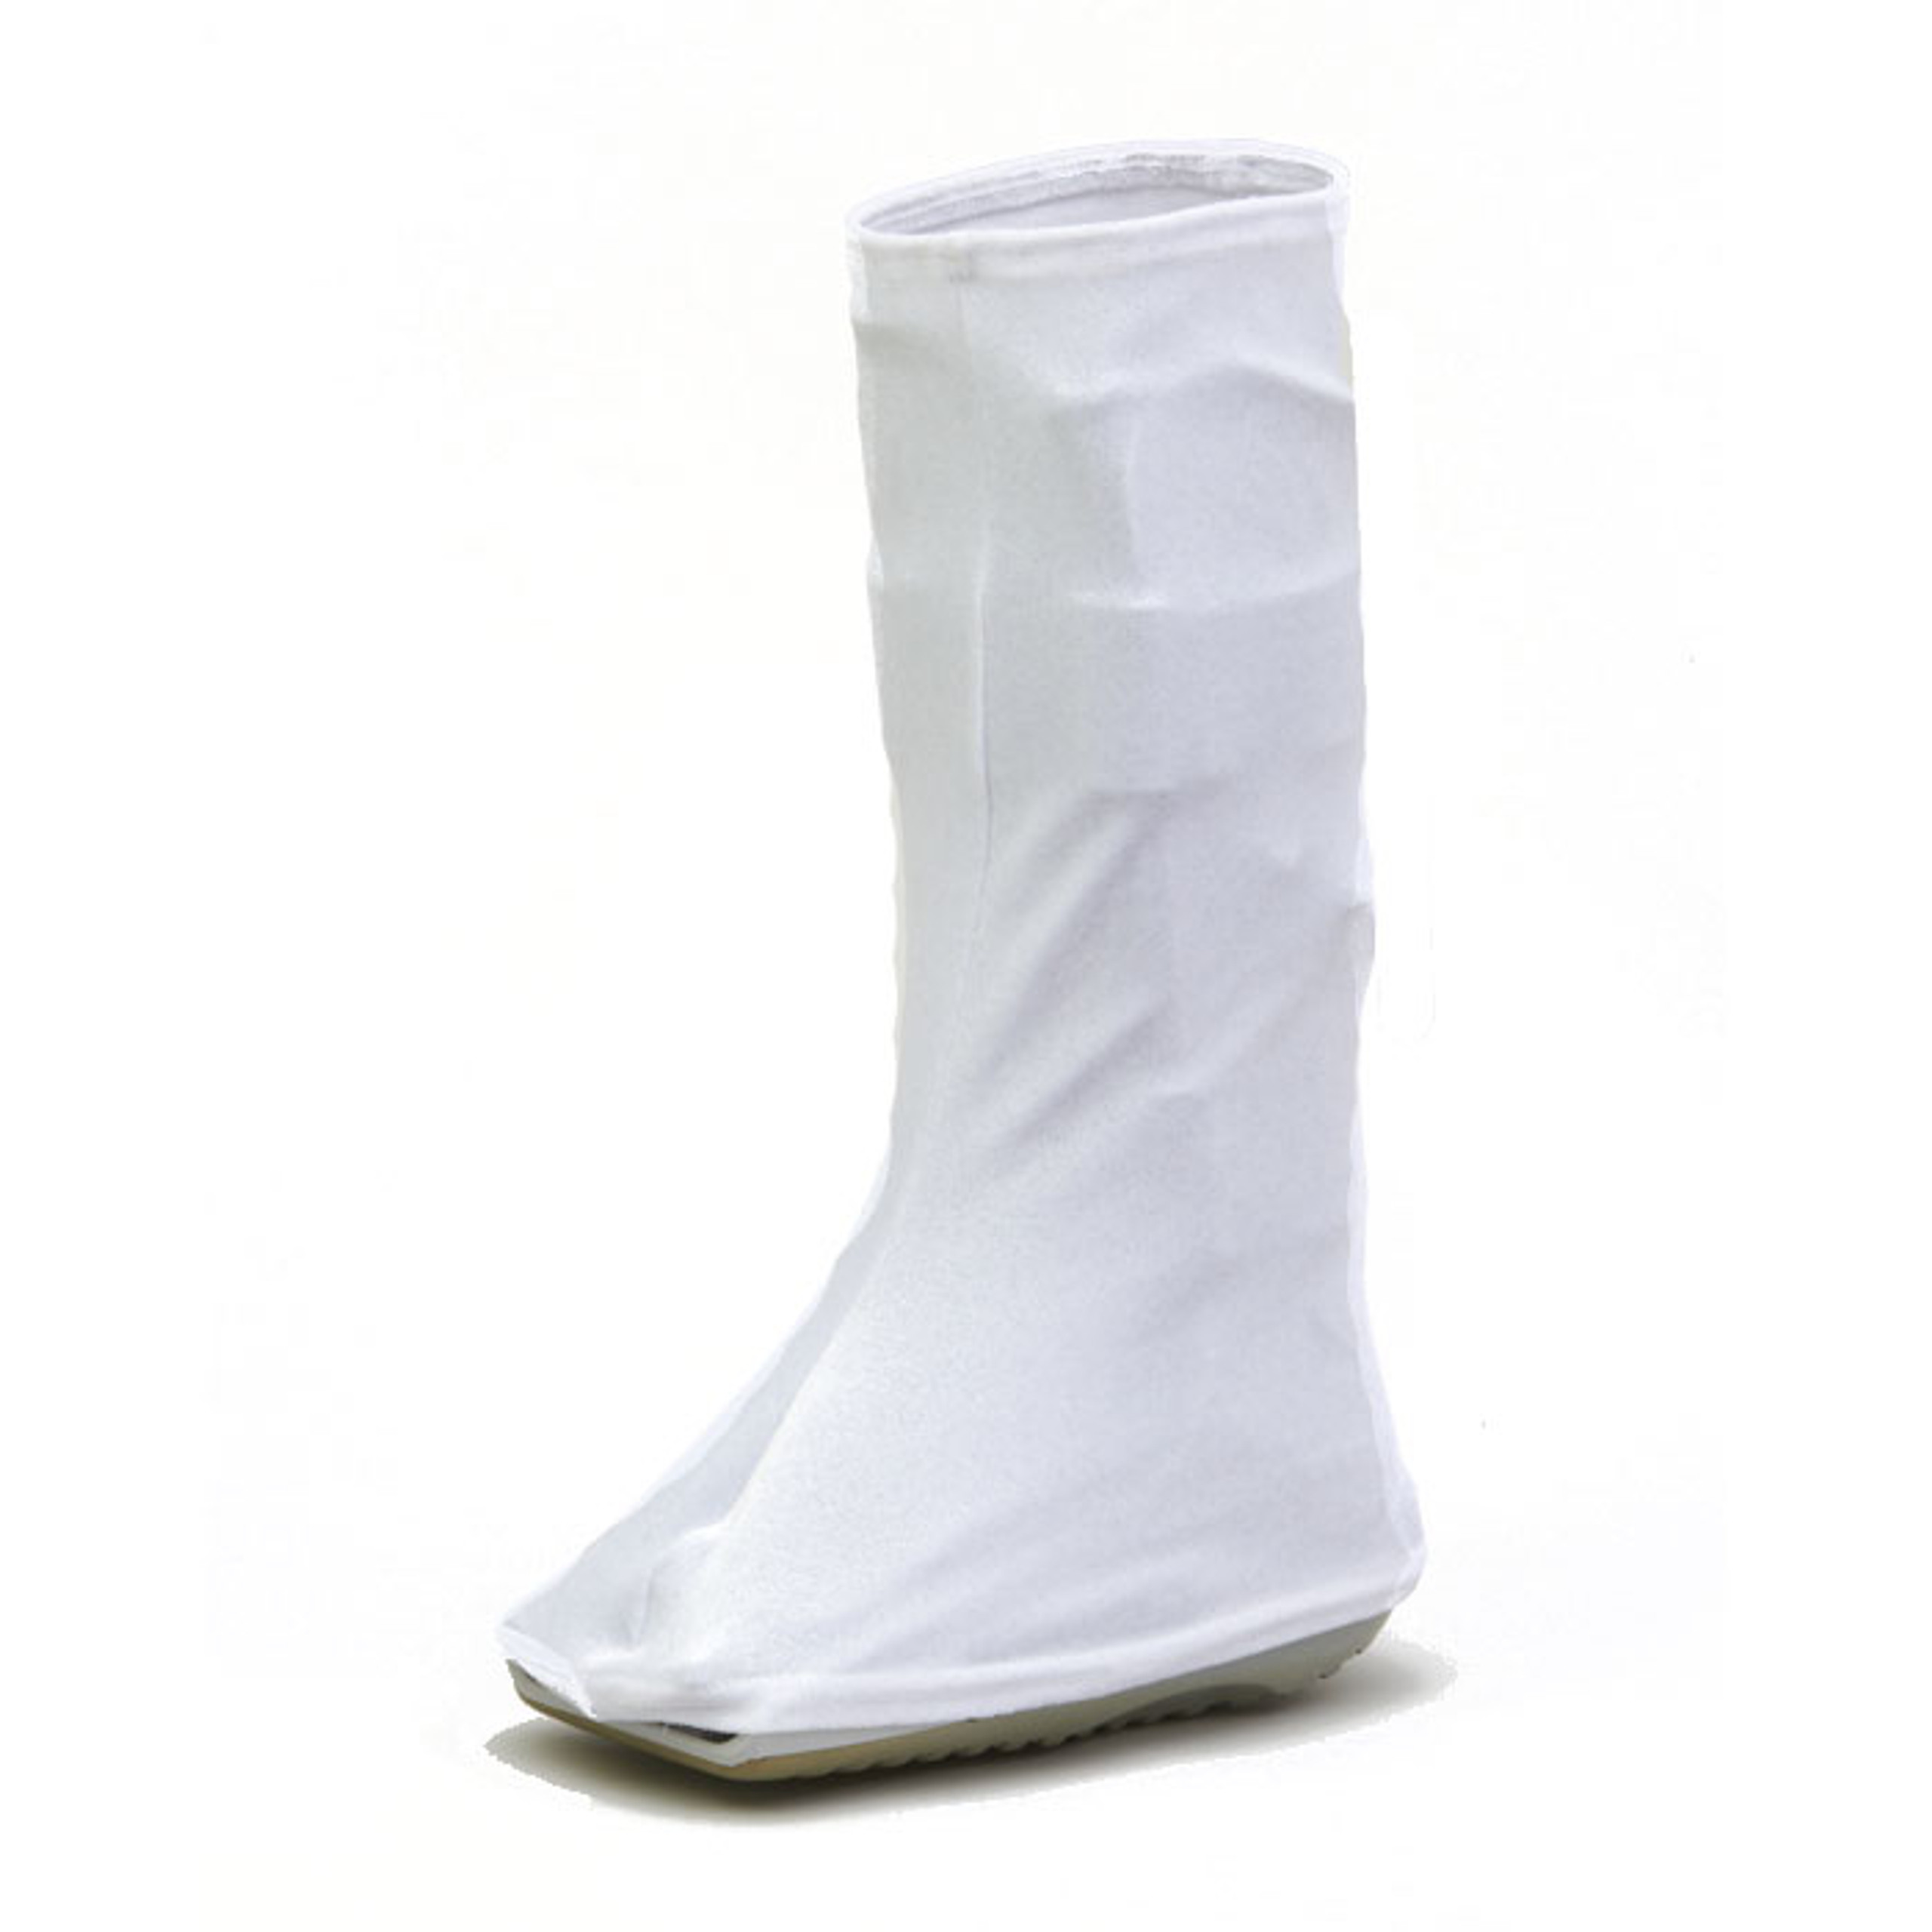 Fashionable & Functional Boot Covers